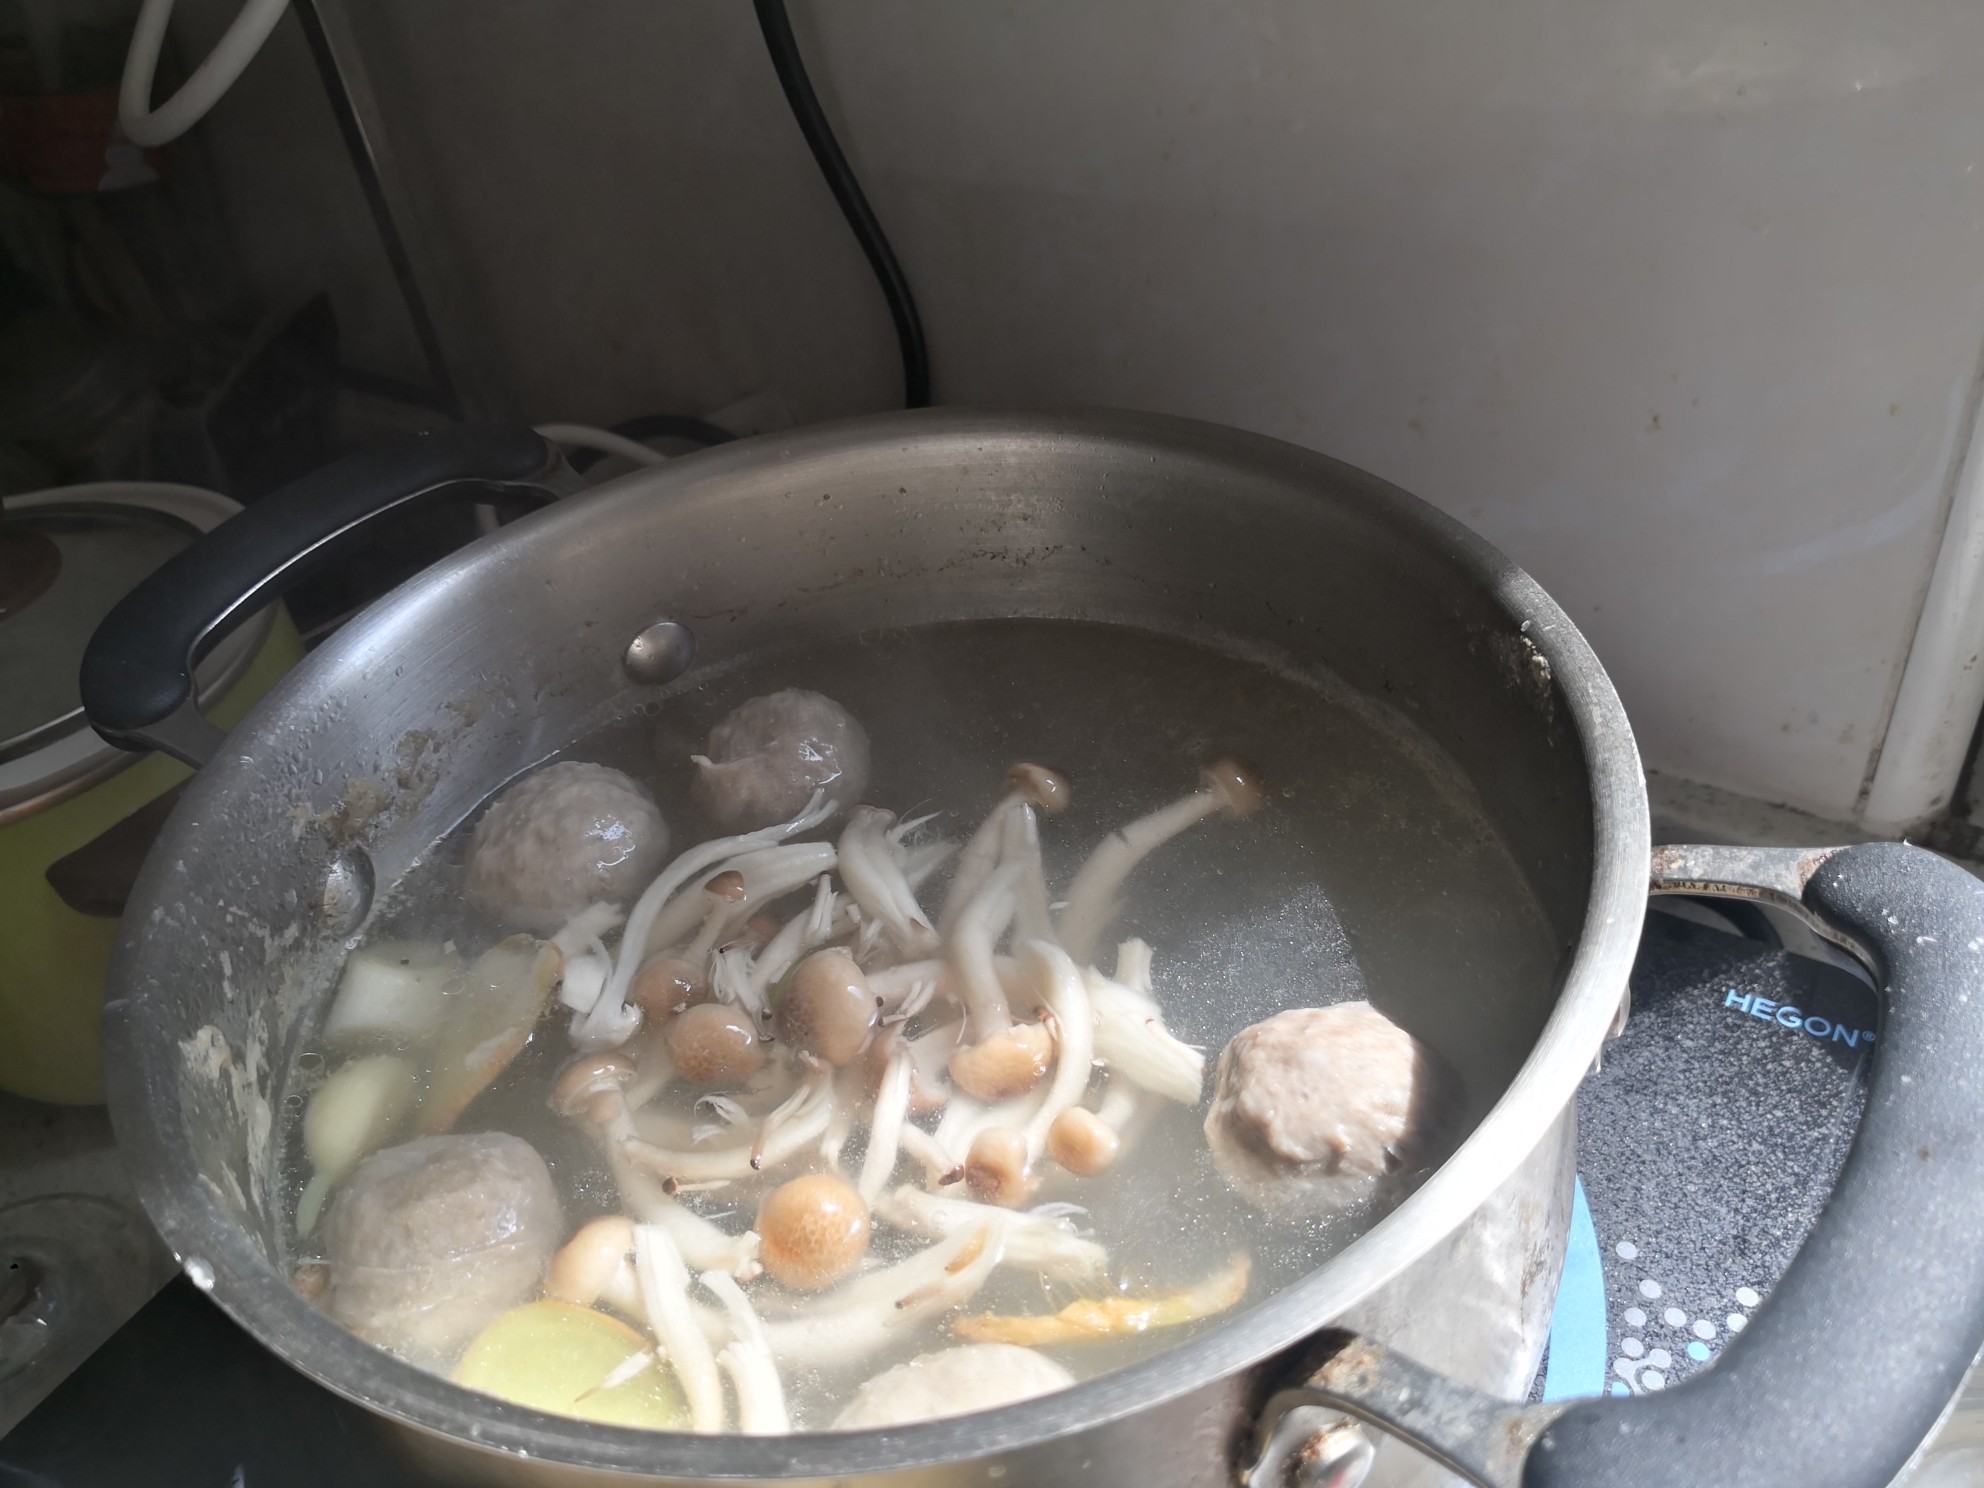 Stewed Winter Bamboo Shoots in Chicken Broth recipe